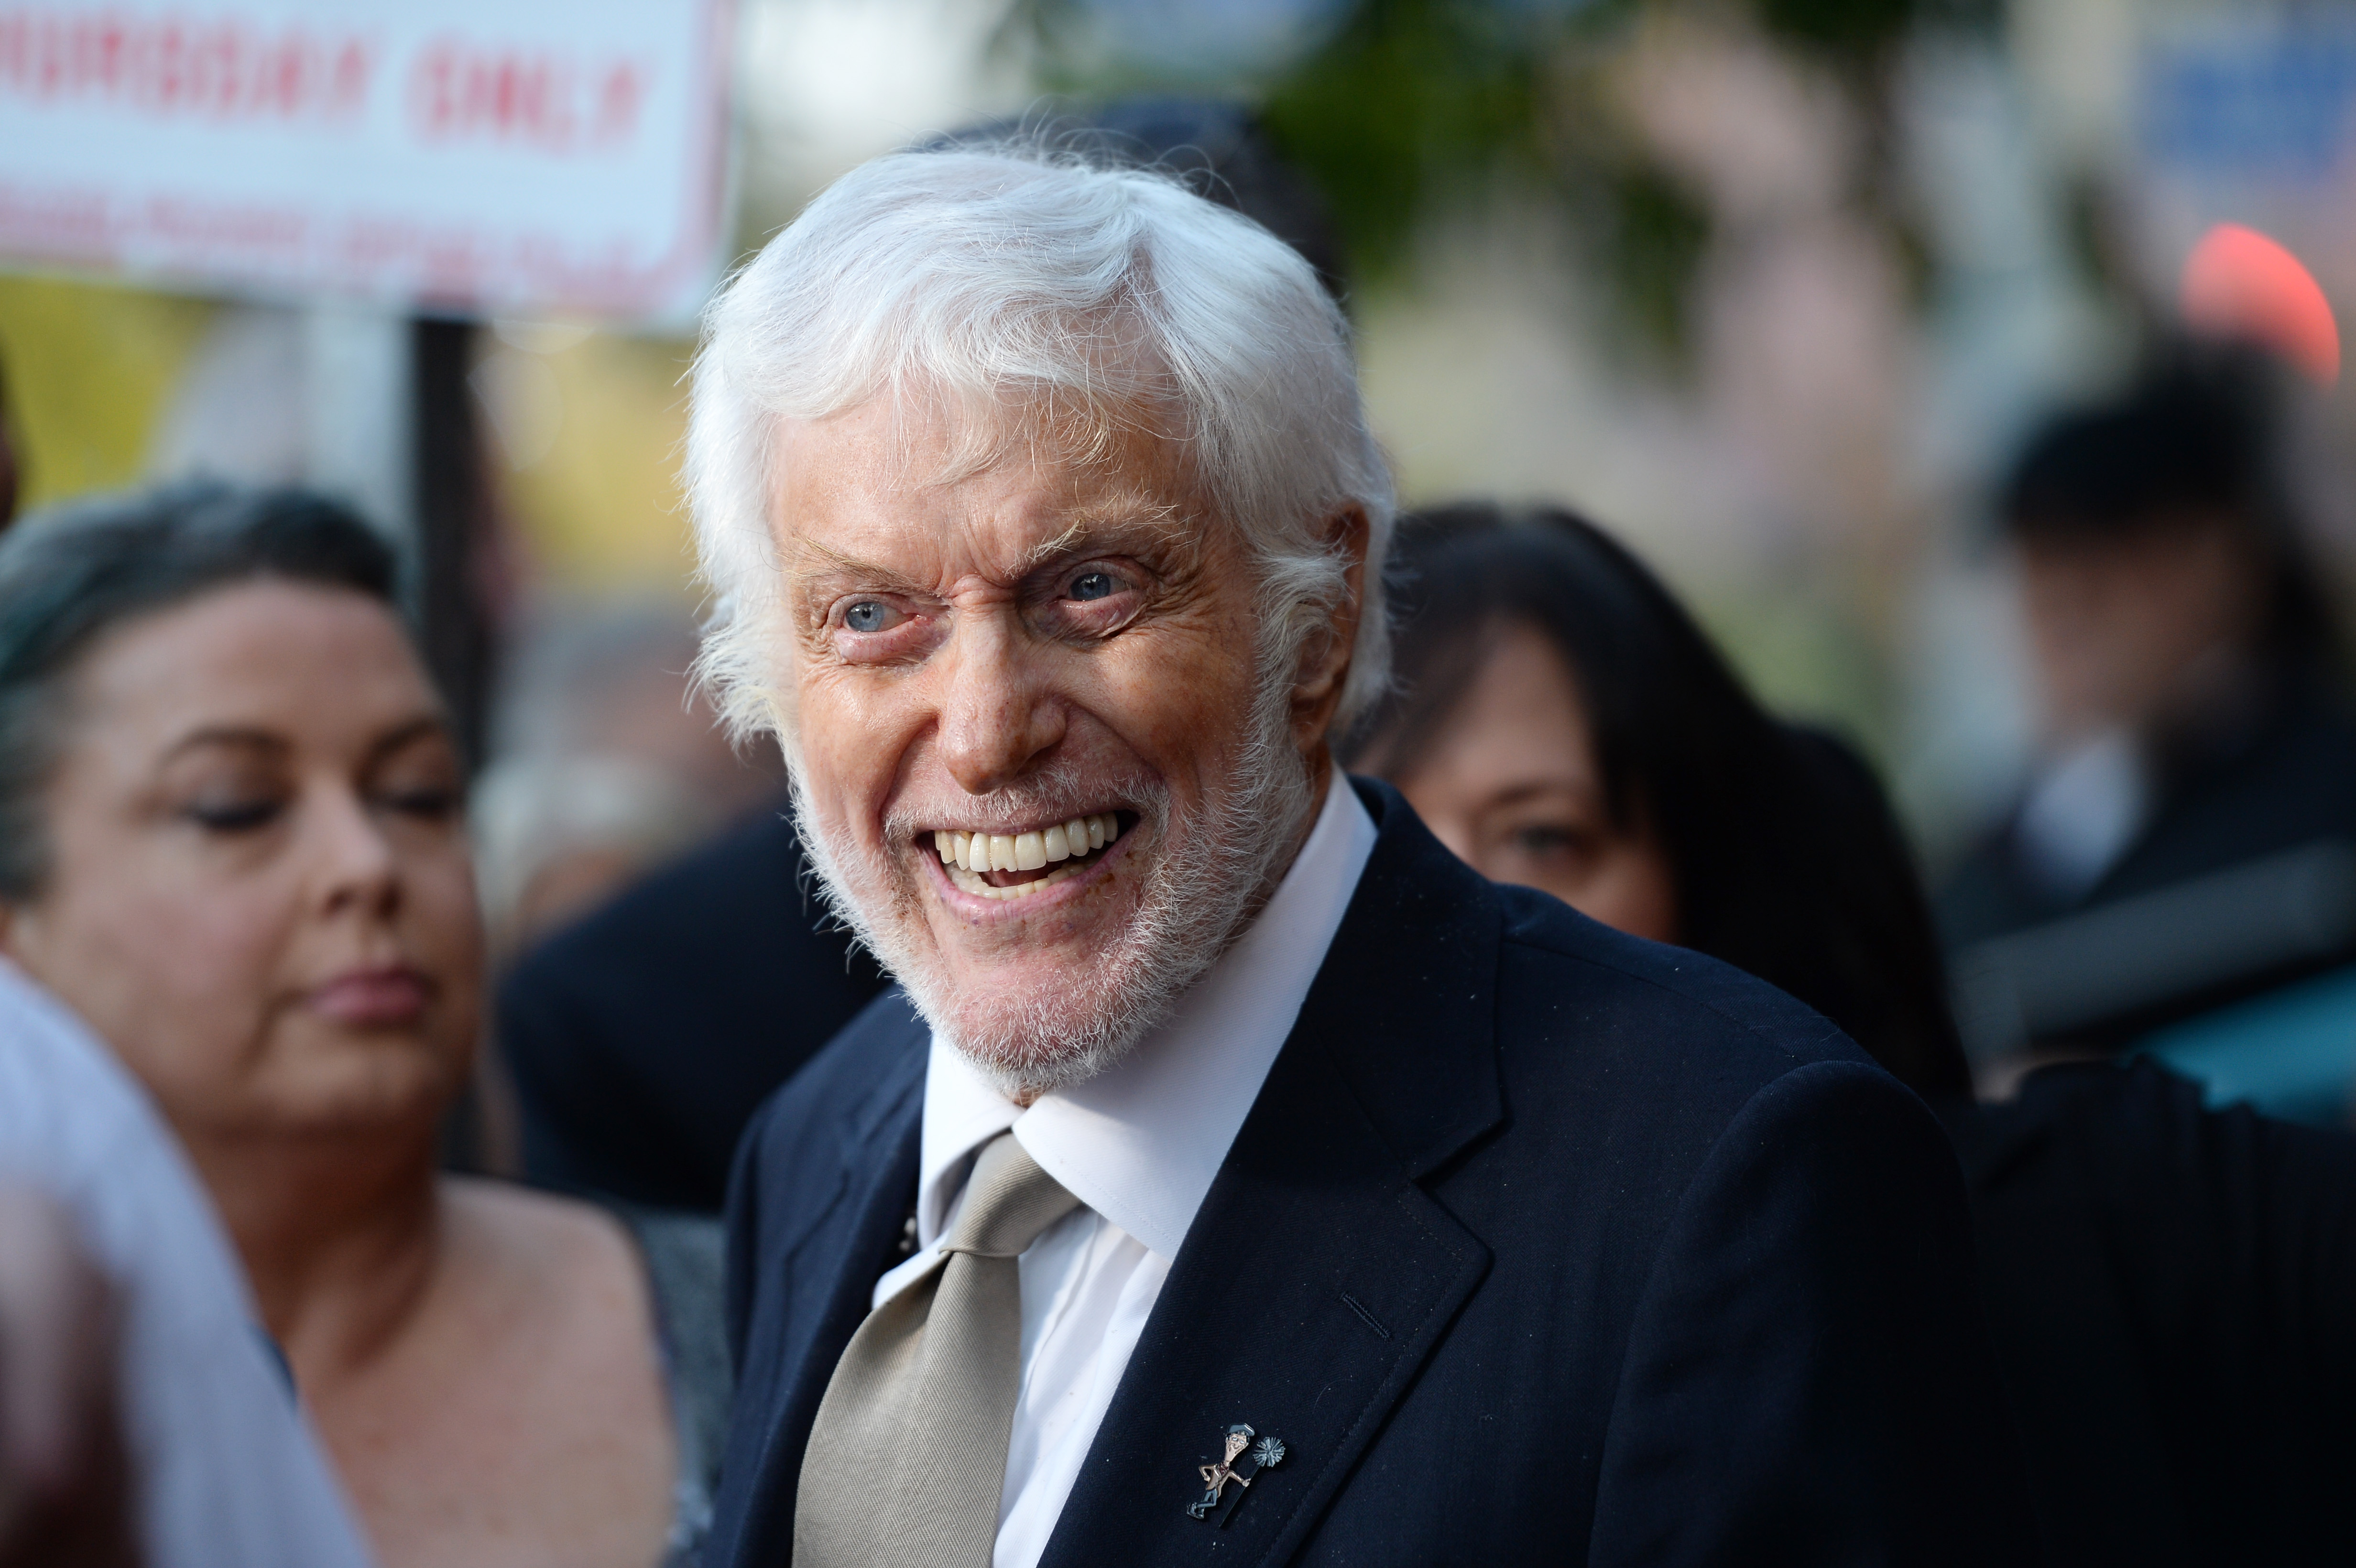 Dick Van Dyke arrives at the debut of the Southern California location of Michael Feinstein's new supper club Feinstein's at Vitello's on June 13, 2019, in Studio City, California. | Source: Getty Images